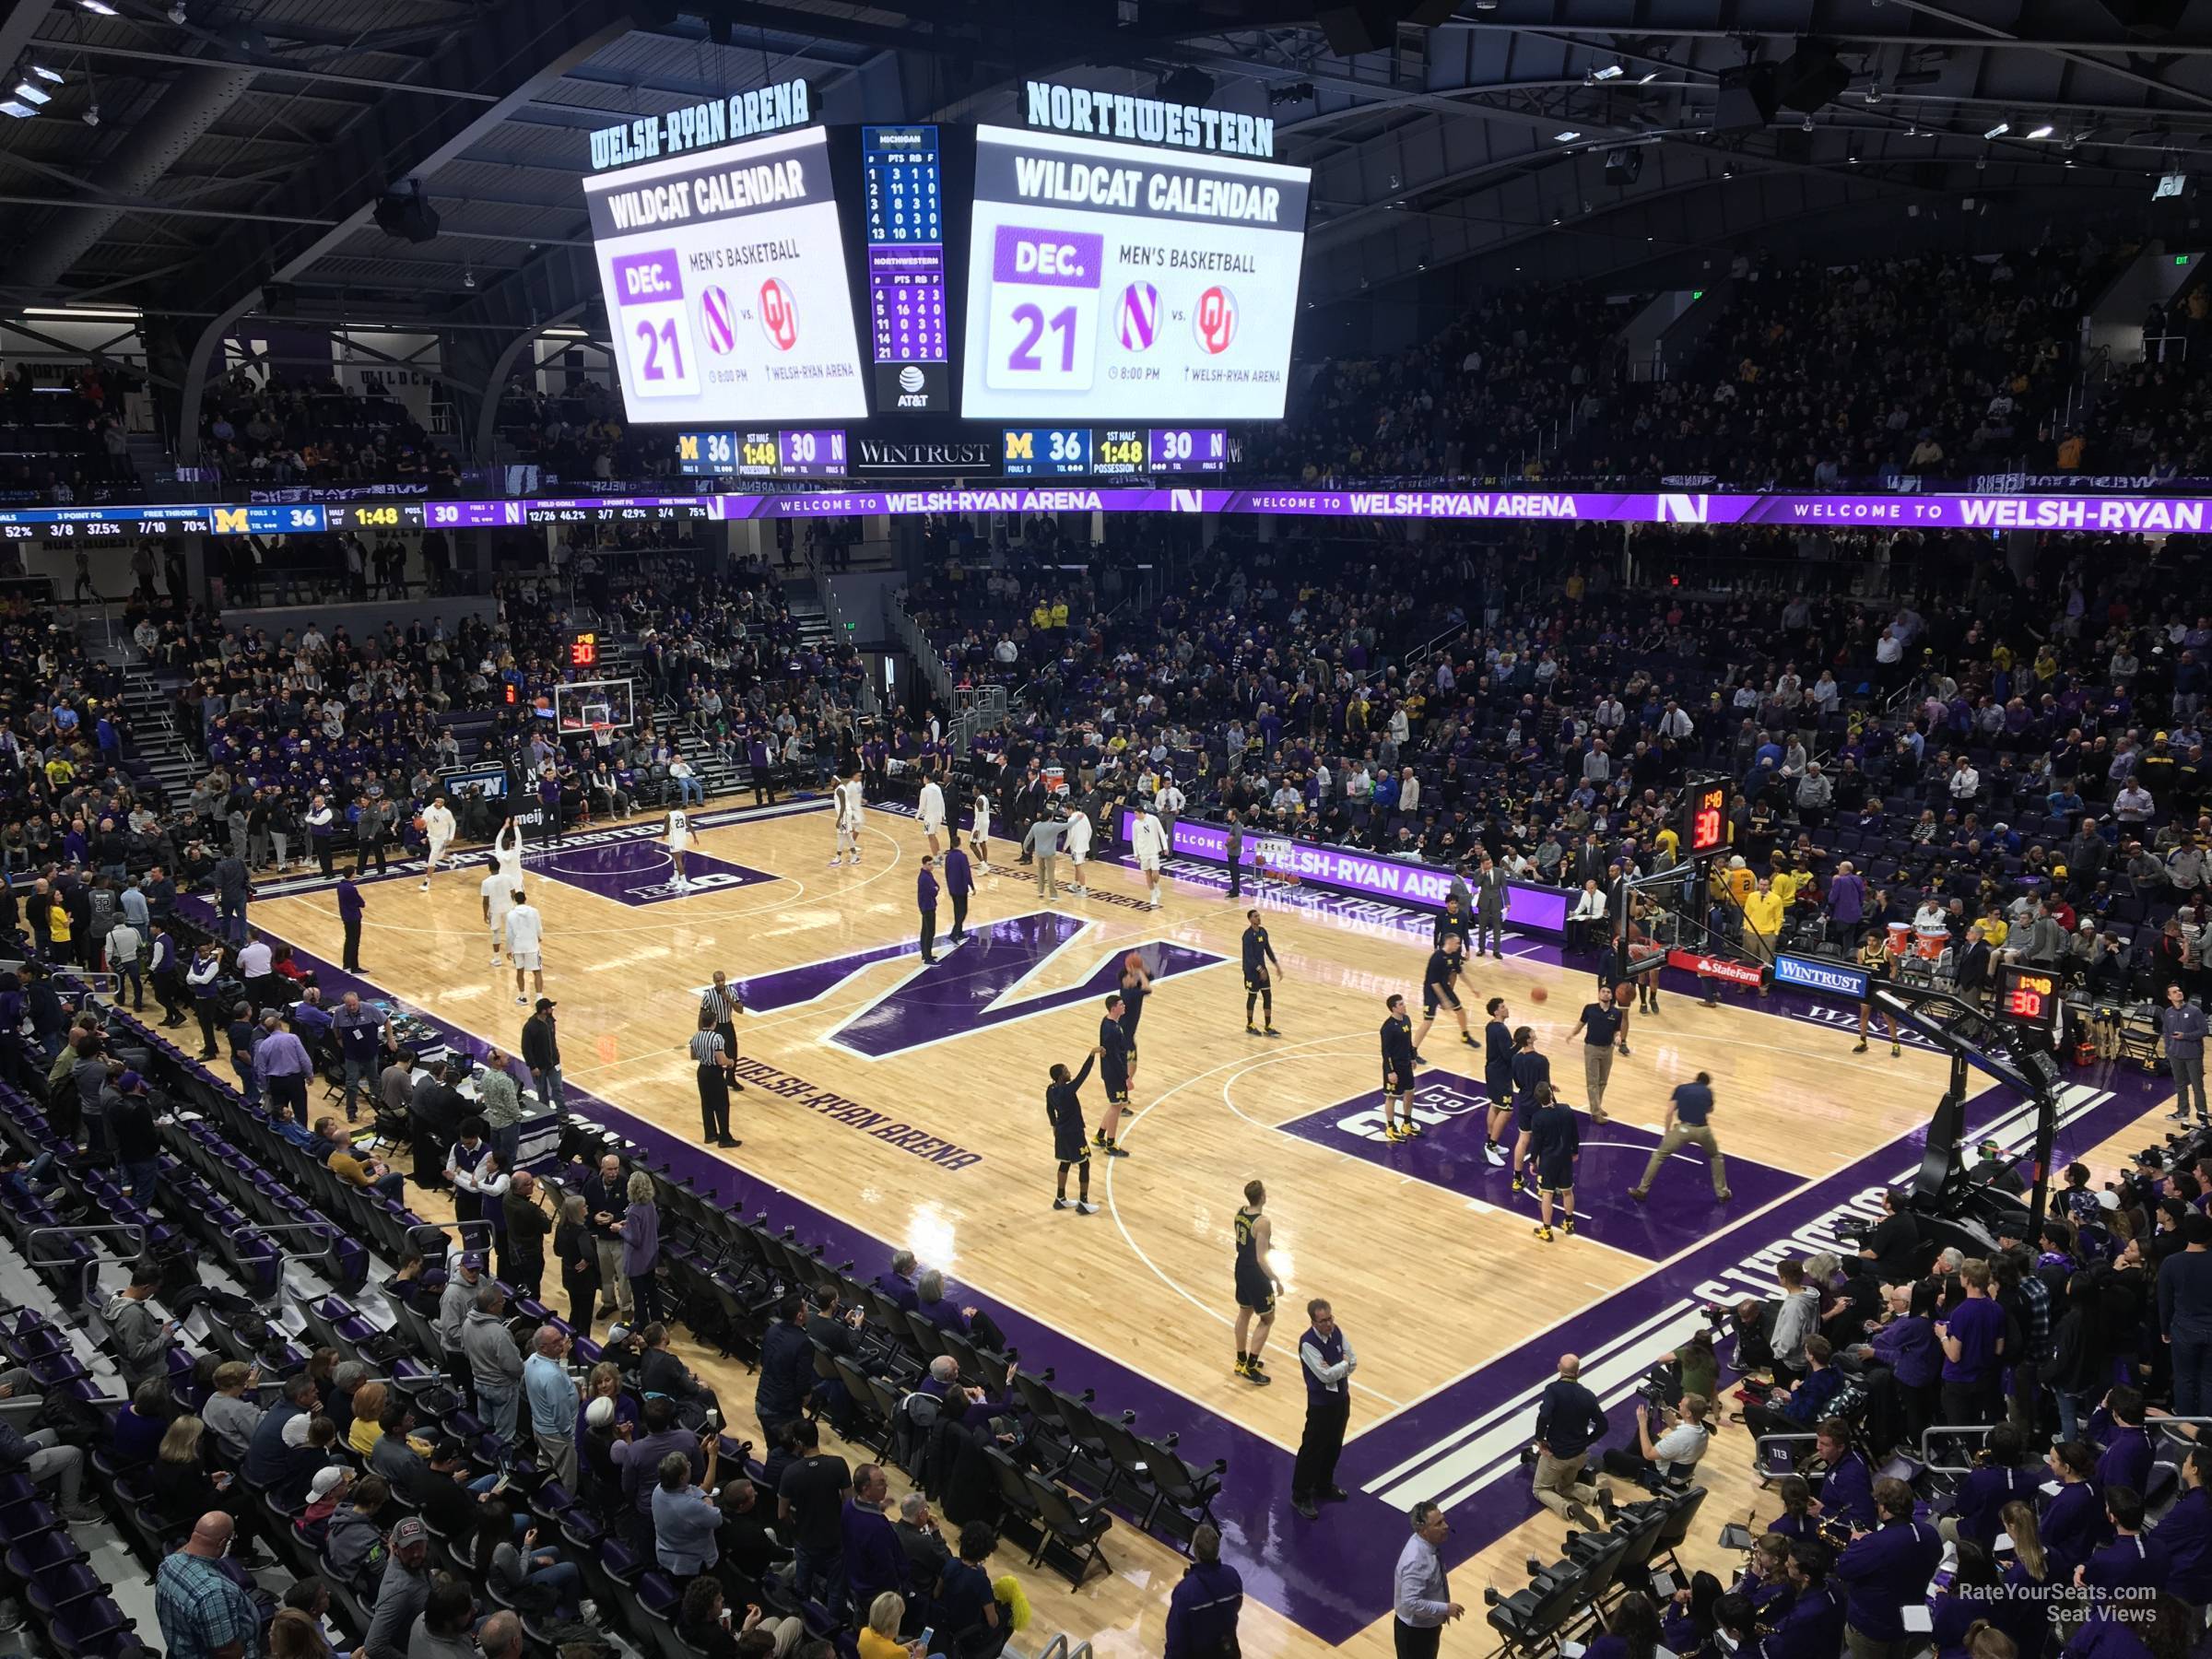 section 217, row 1 seat view  - welsh-ryan arena